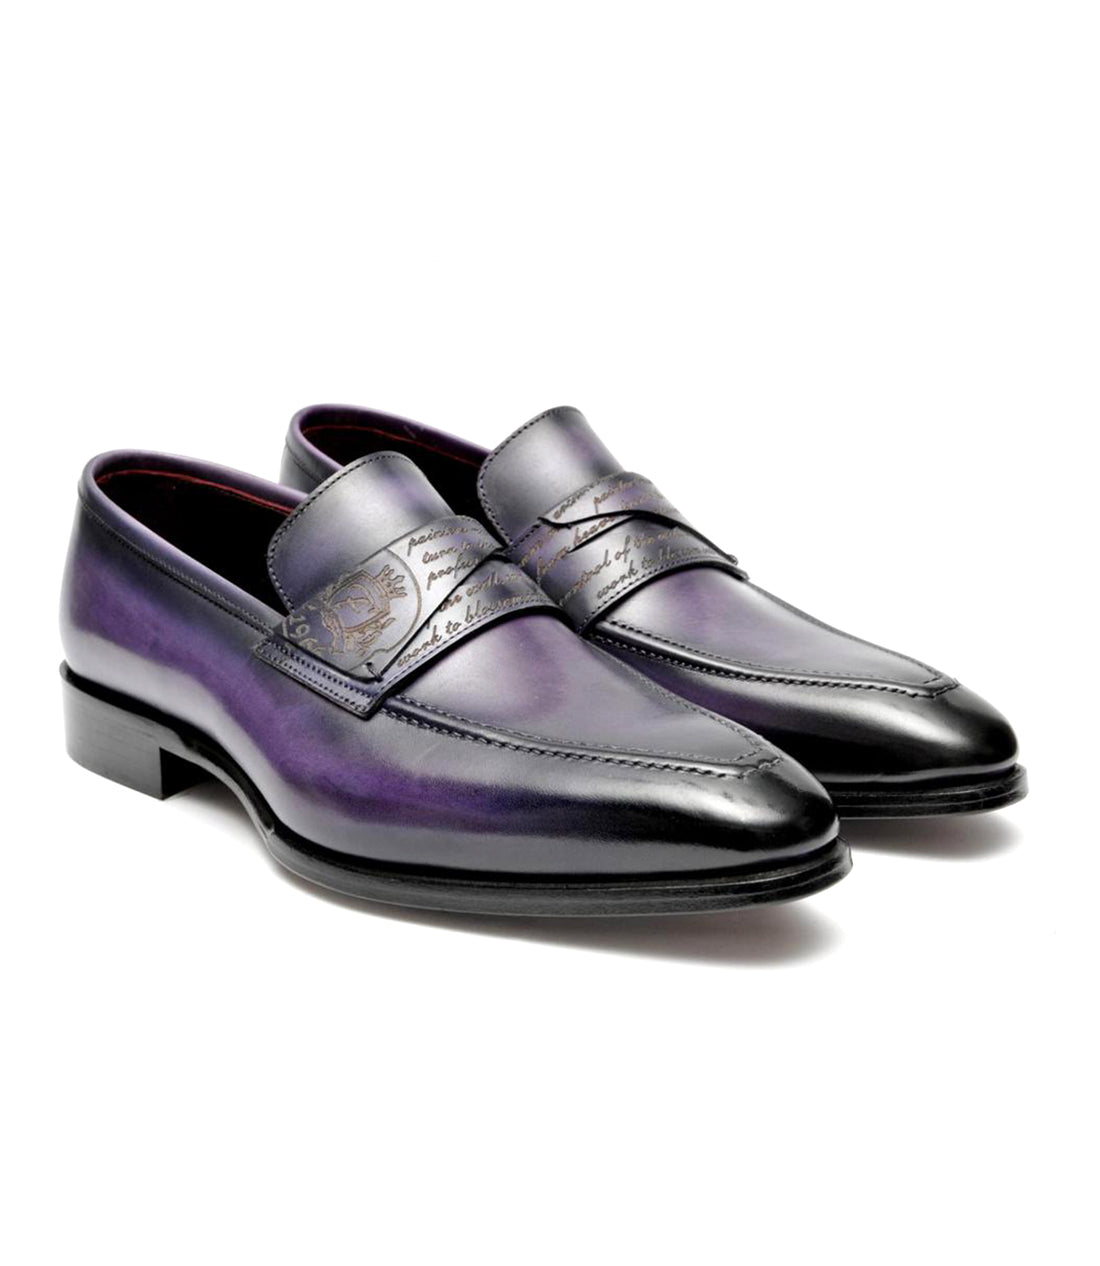 FILANGIERI - STAINED PURPLE LEATHER DRESS LOAFER WITH CURSIVE ON IN-STEP